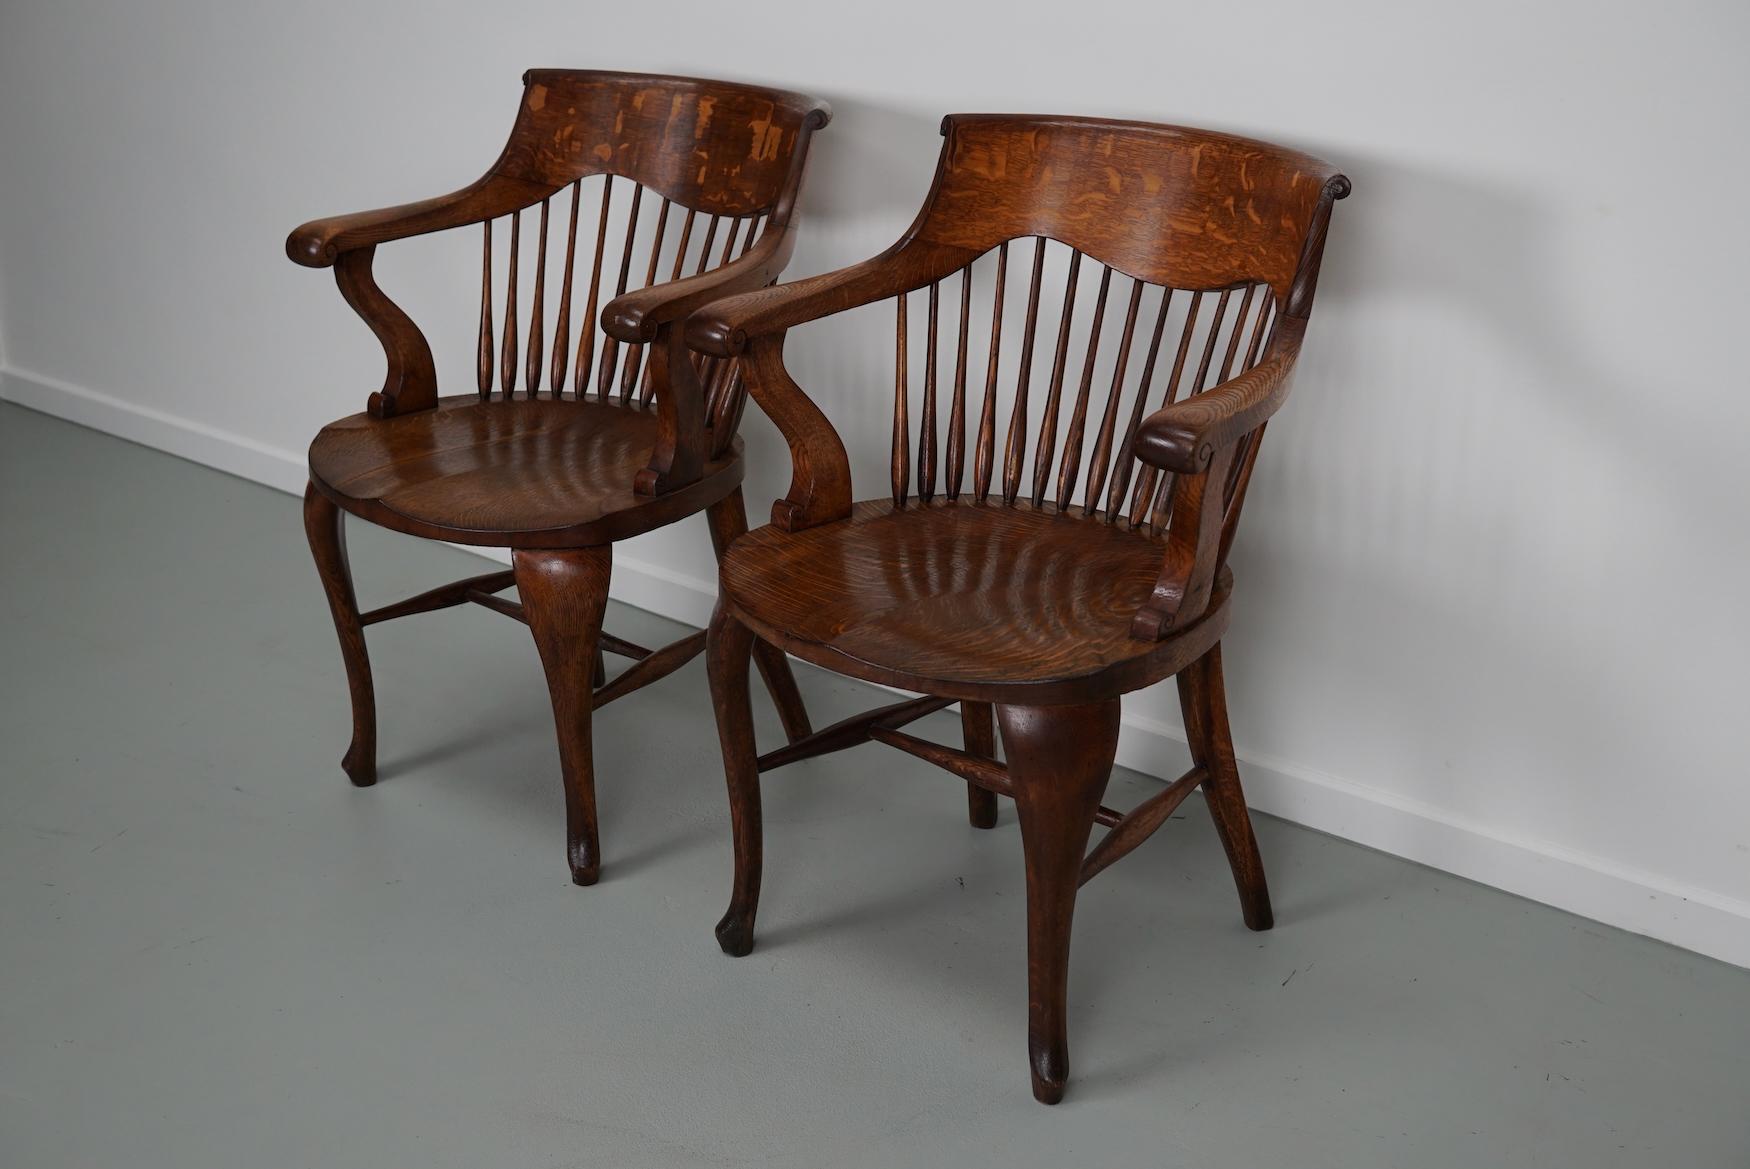 This pair of Edwardian desk chairs were made in the early 20th century from very nice quality oak. They are in a good stable condition and have a very nice warm color.